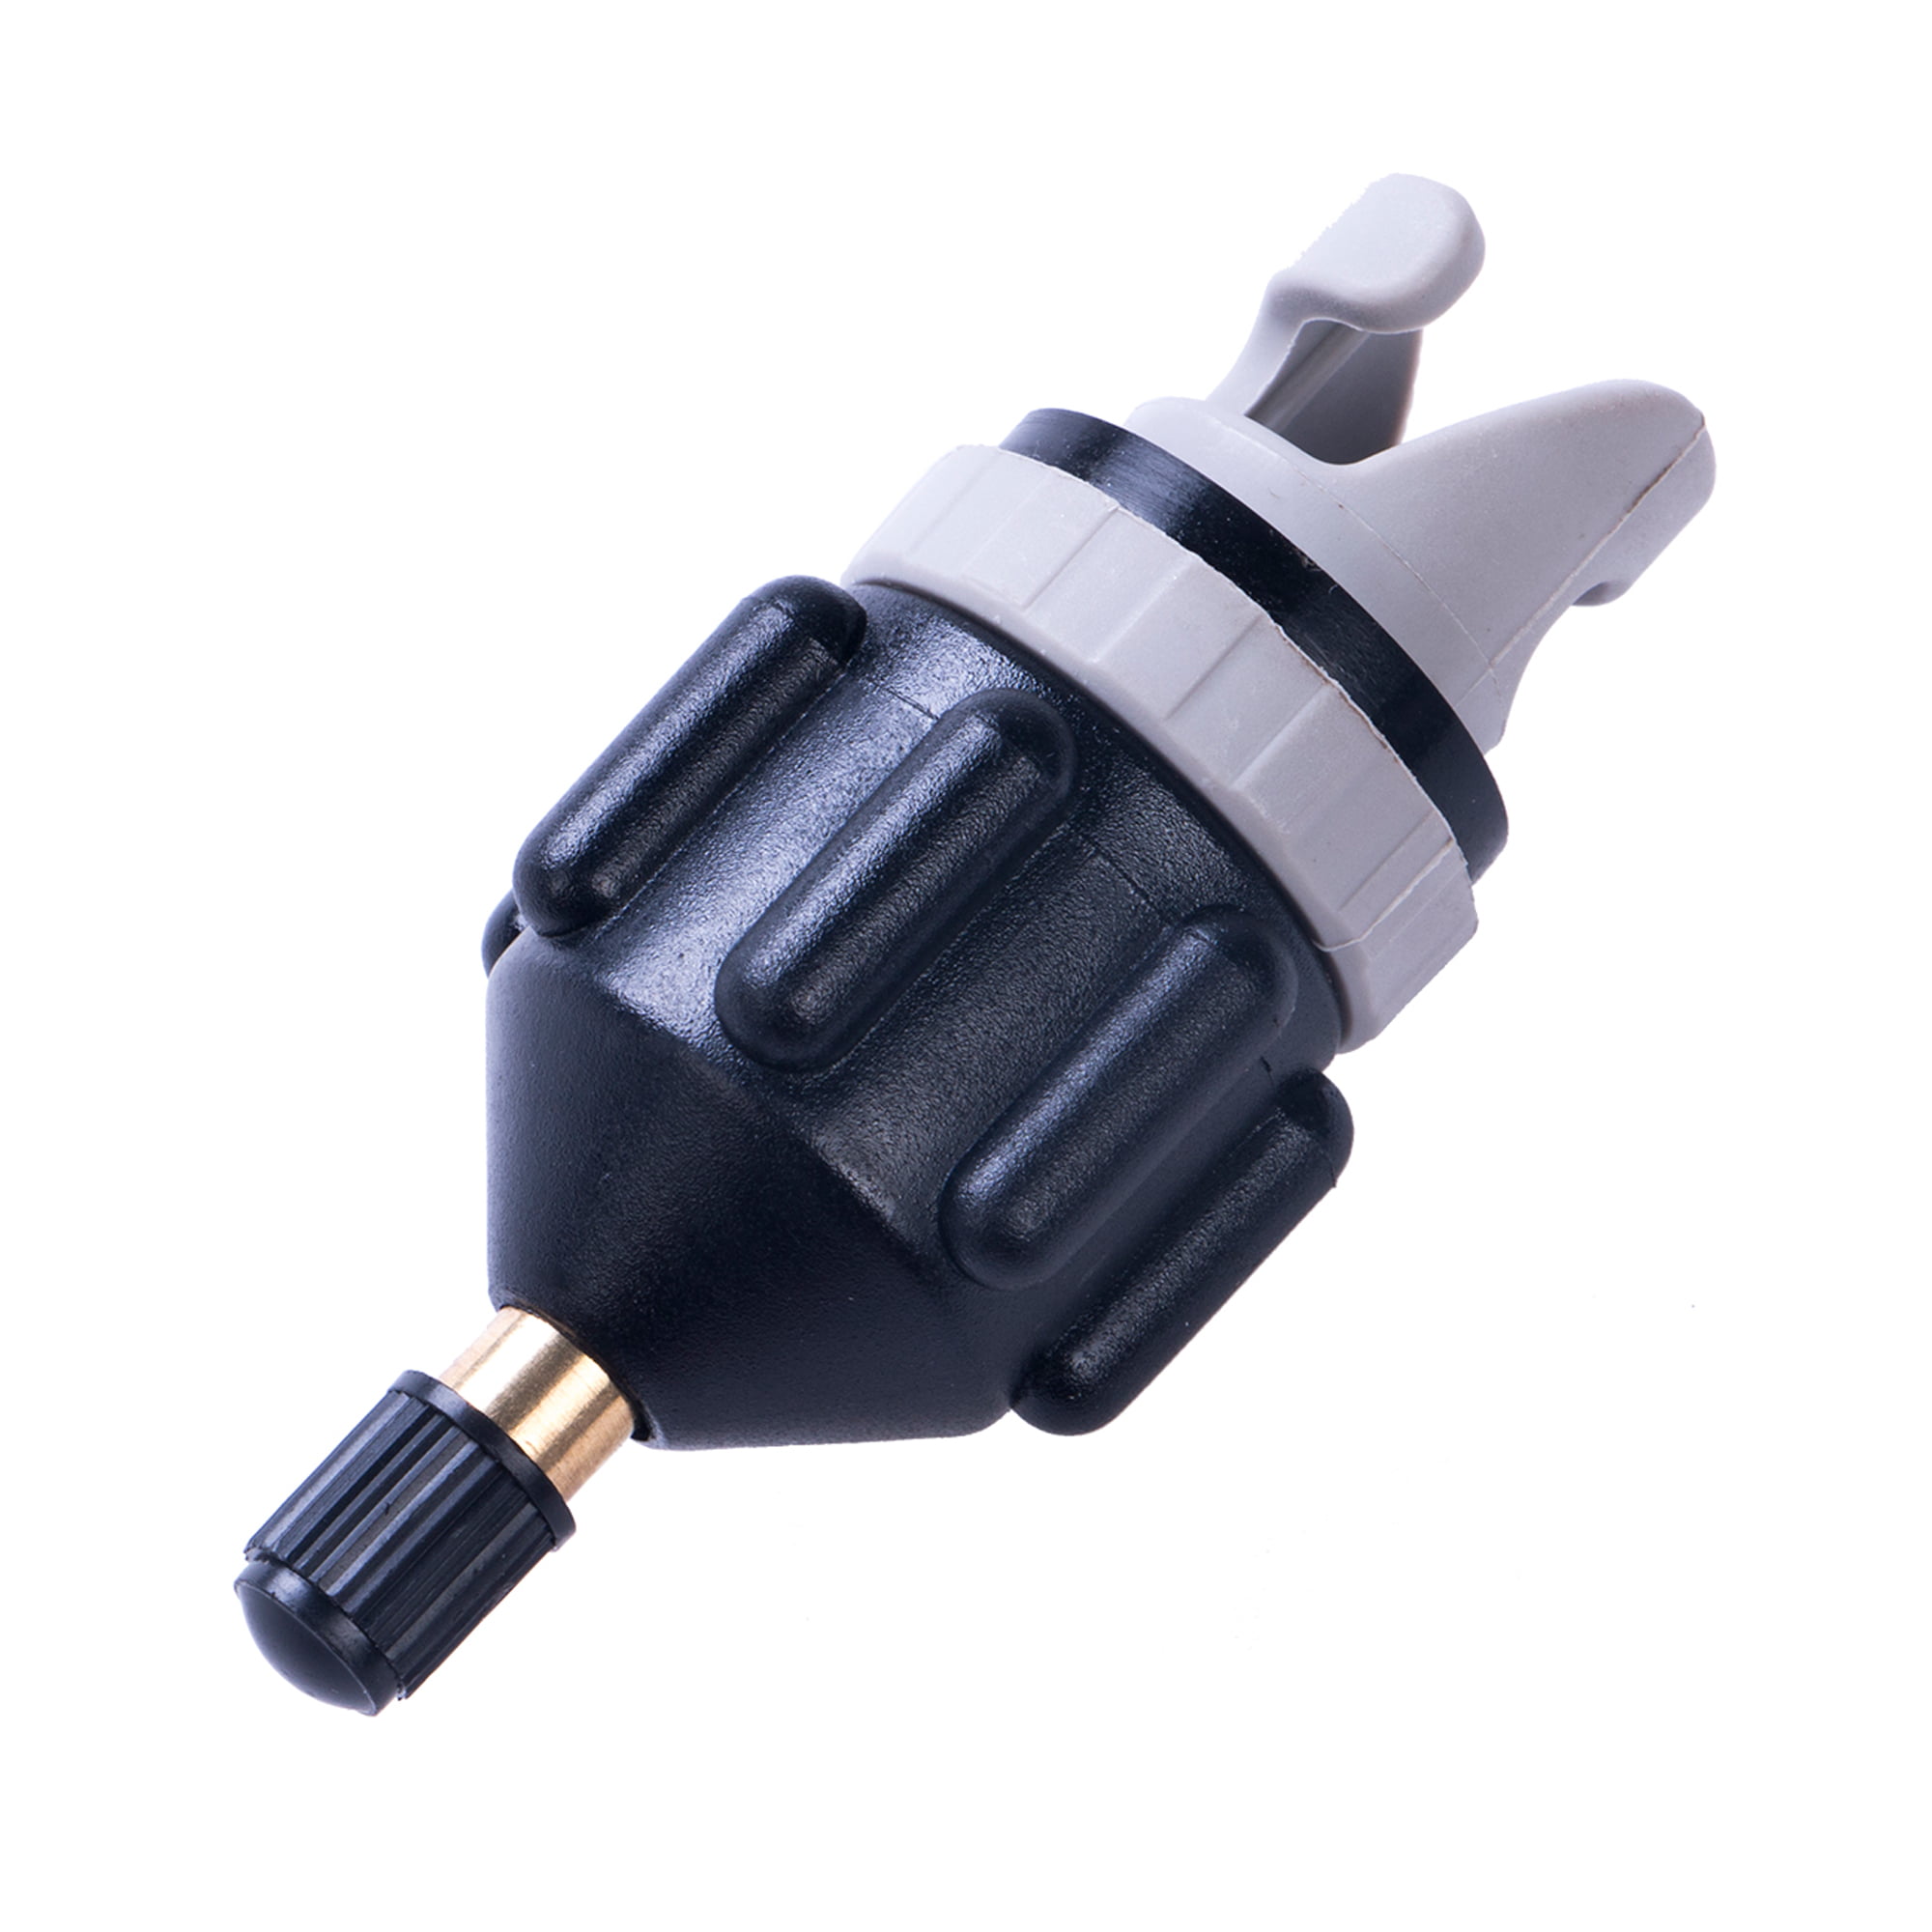 SUP Pump Adapter Air Valve Adapter for Inflatable Boat Air Board Accessory 